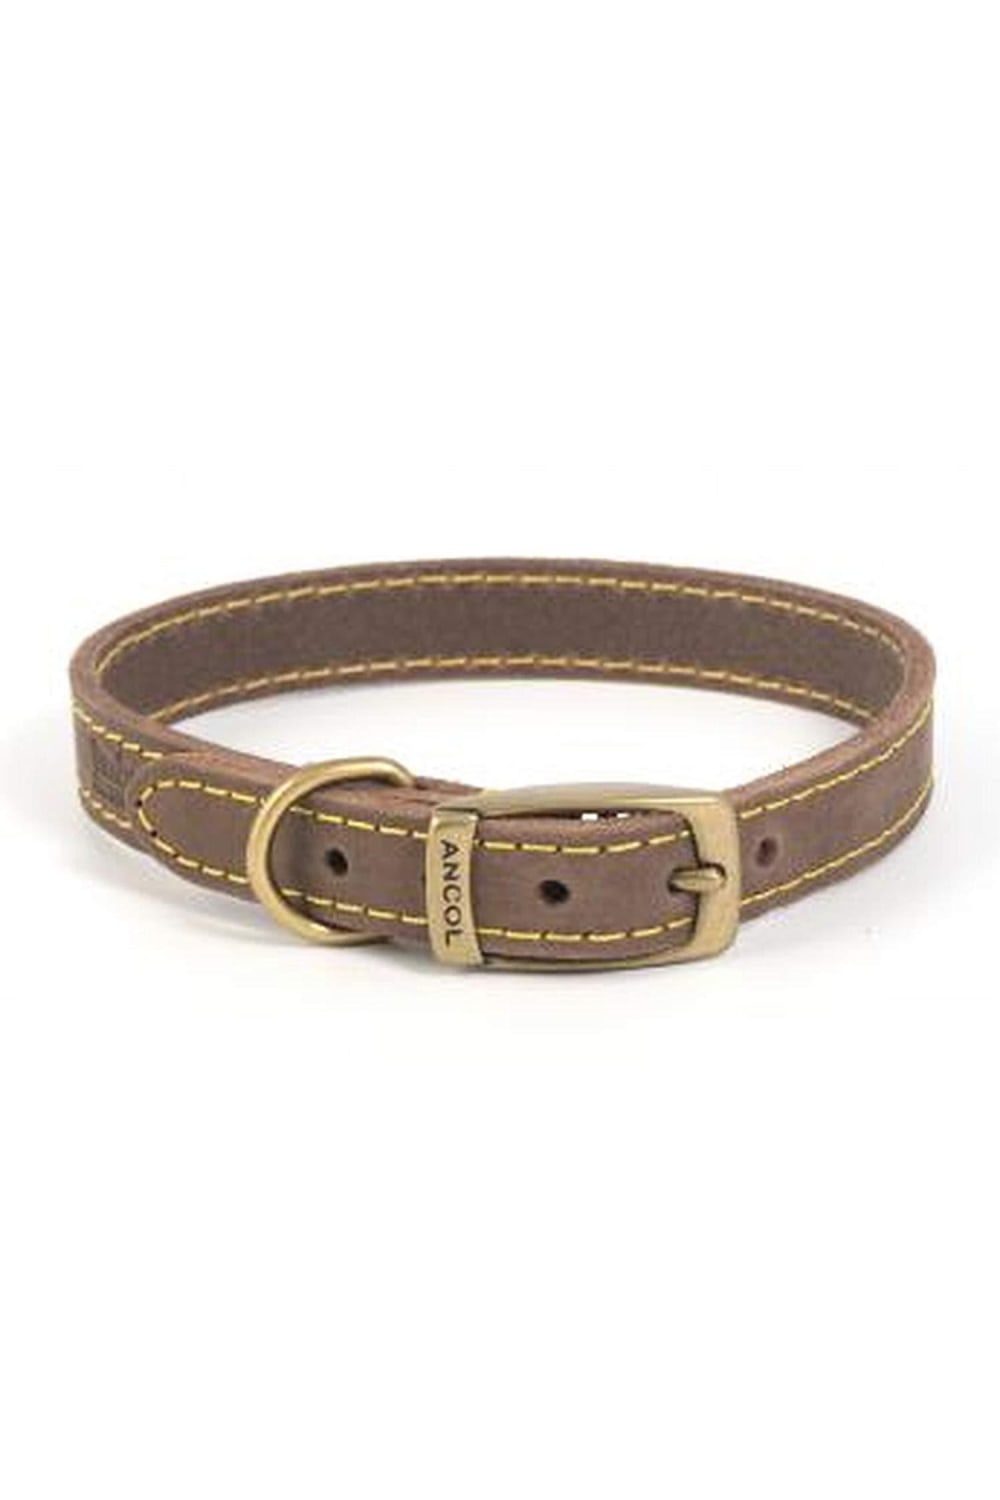 Ancol Timberwolf Leather Dog Collar (Sable) (15.8in)